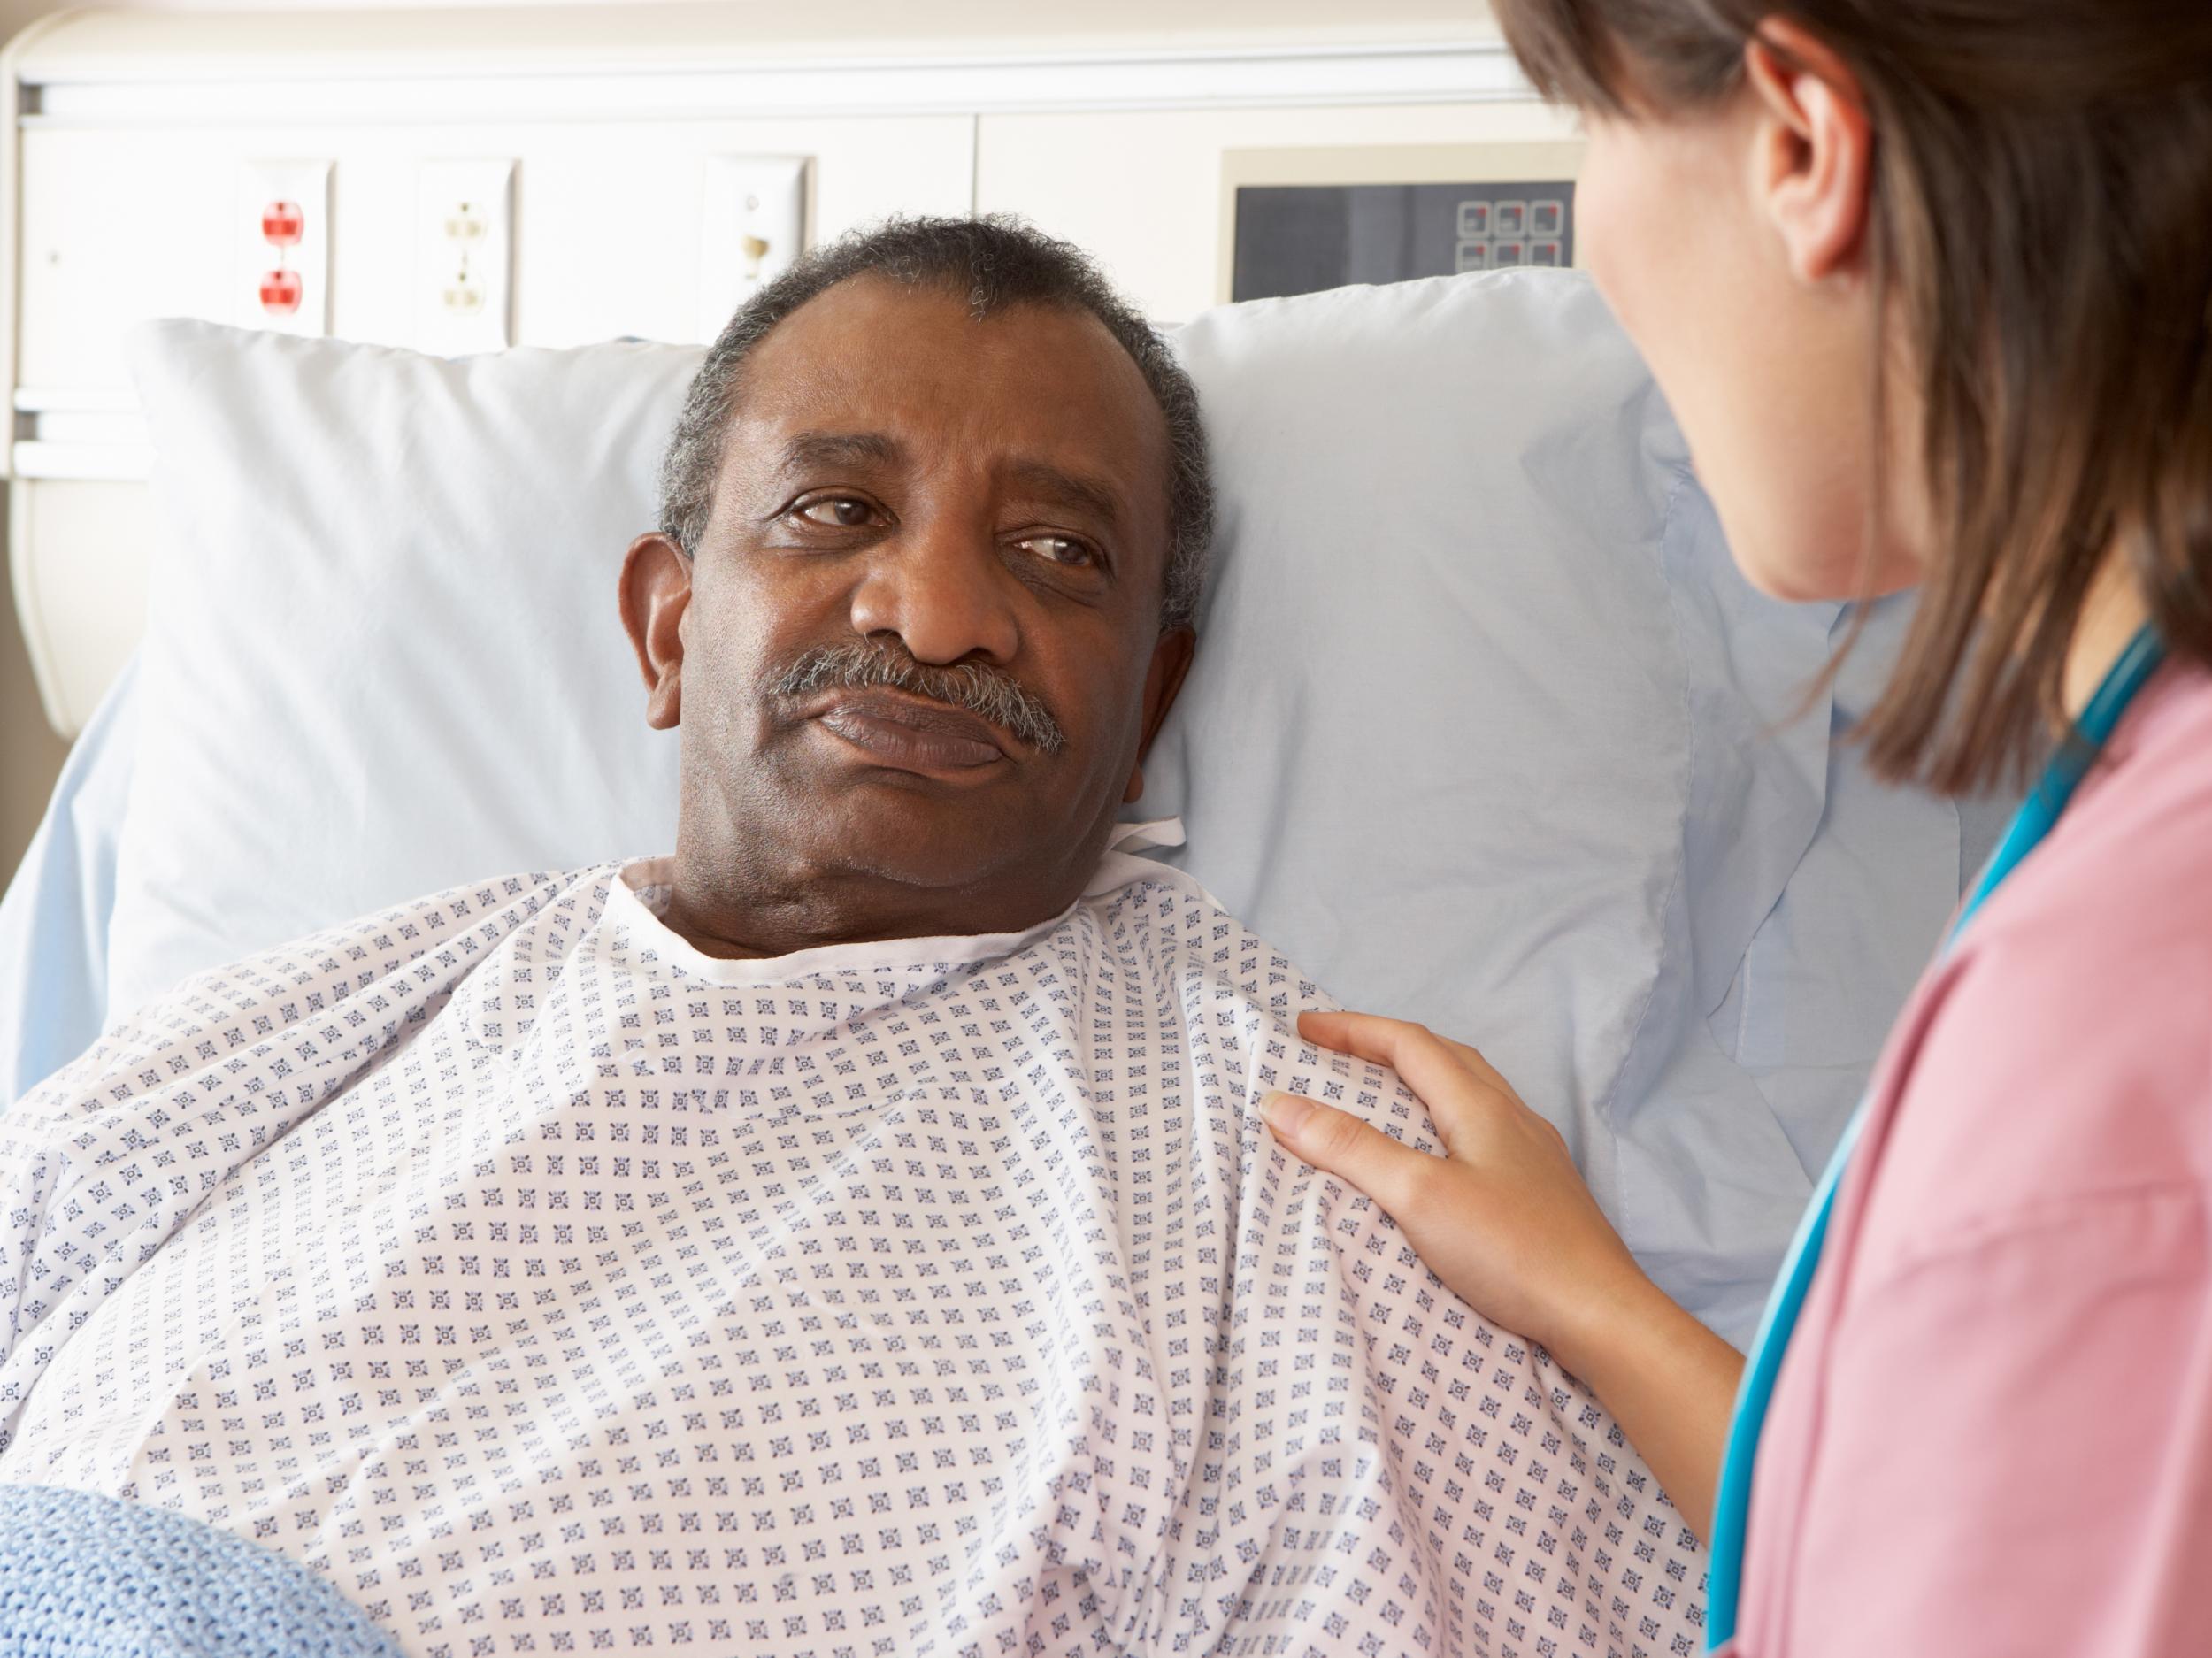 Black people more at risk of dementia and less likely to receive timely diagnosis